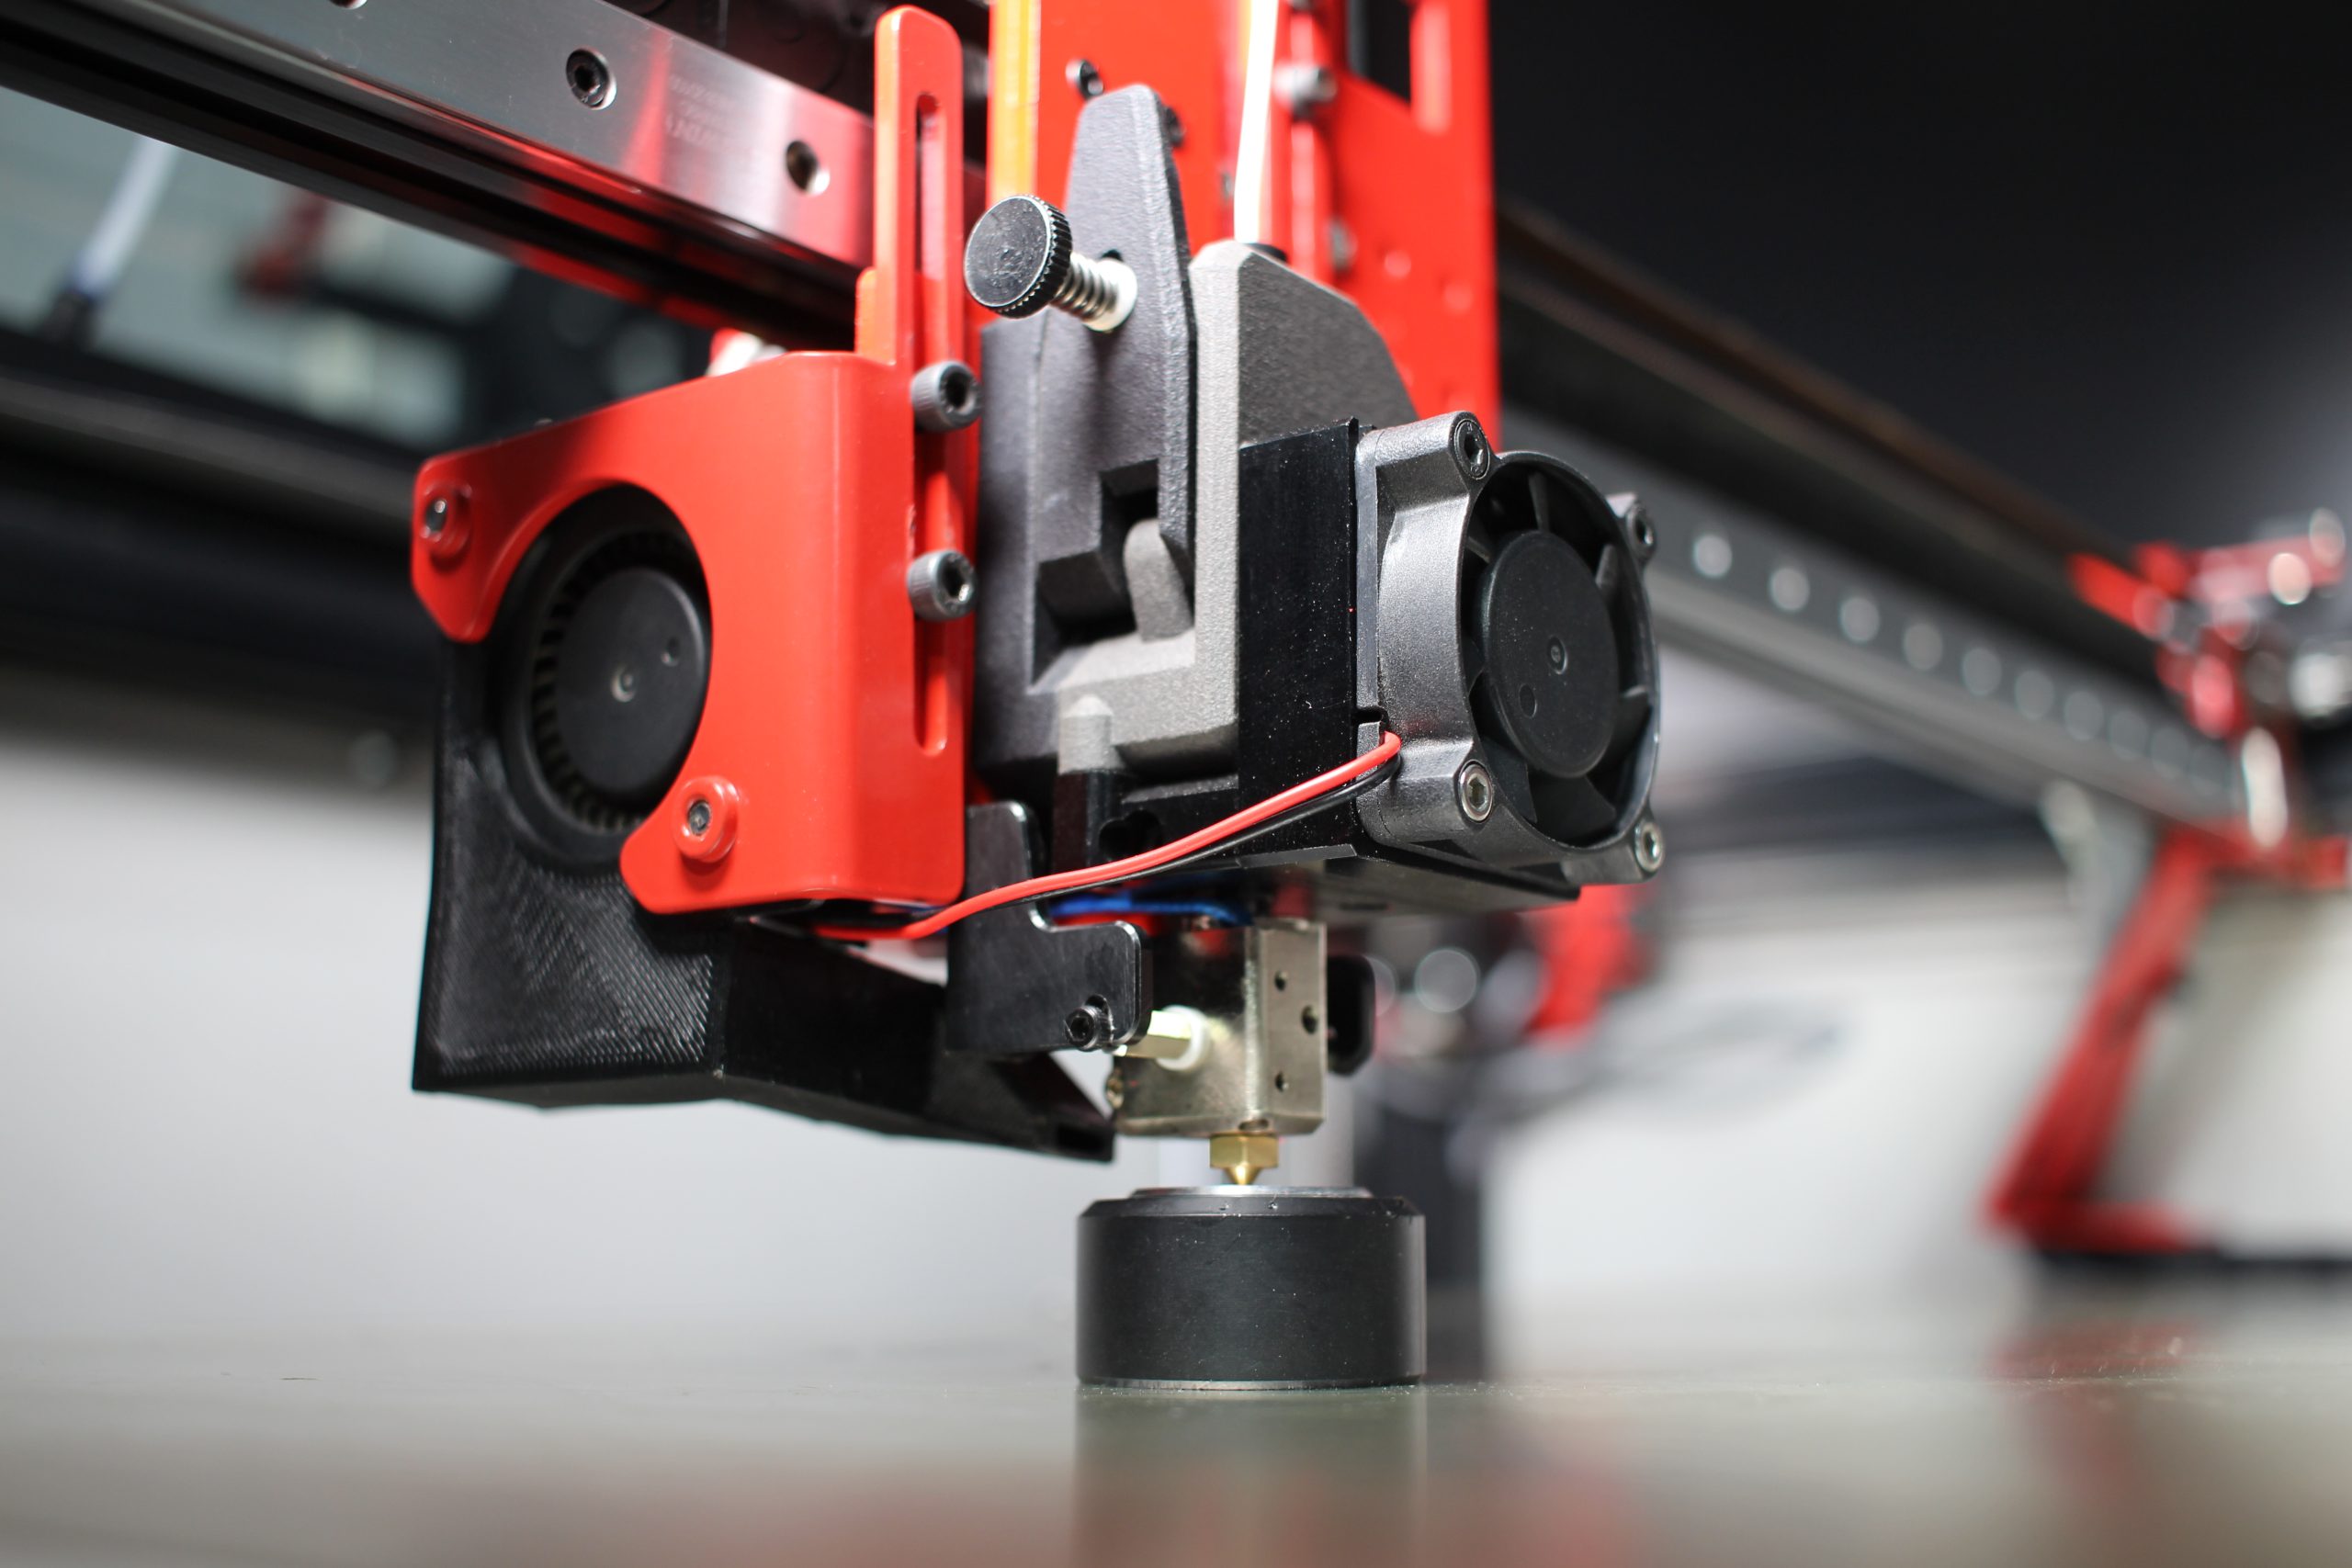 Modix launches a number of new add-ons for its large-format 3D printers